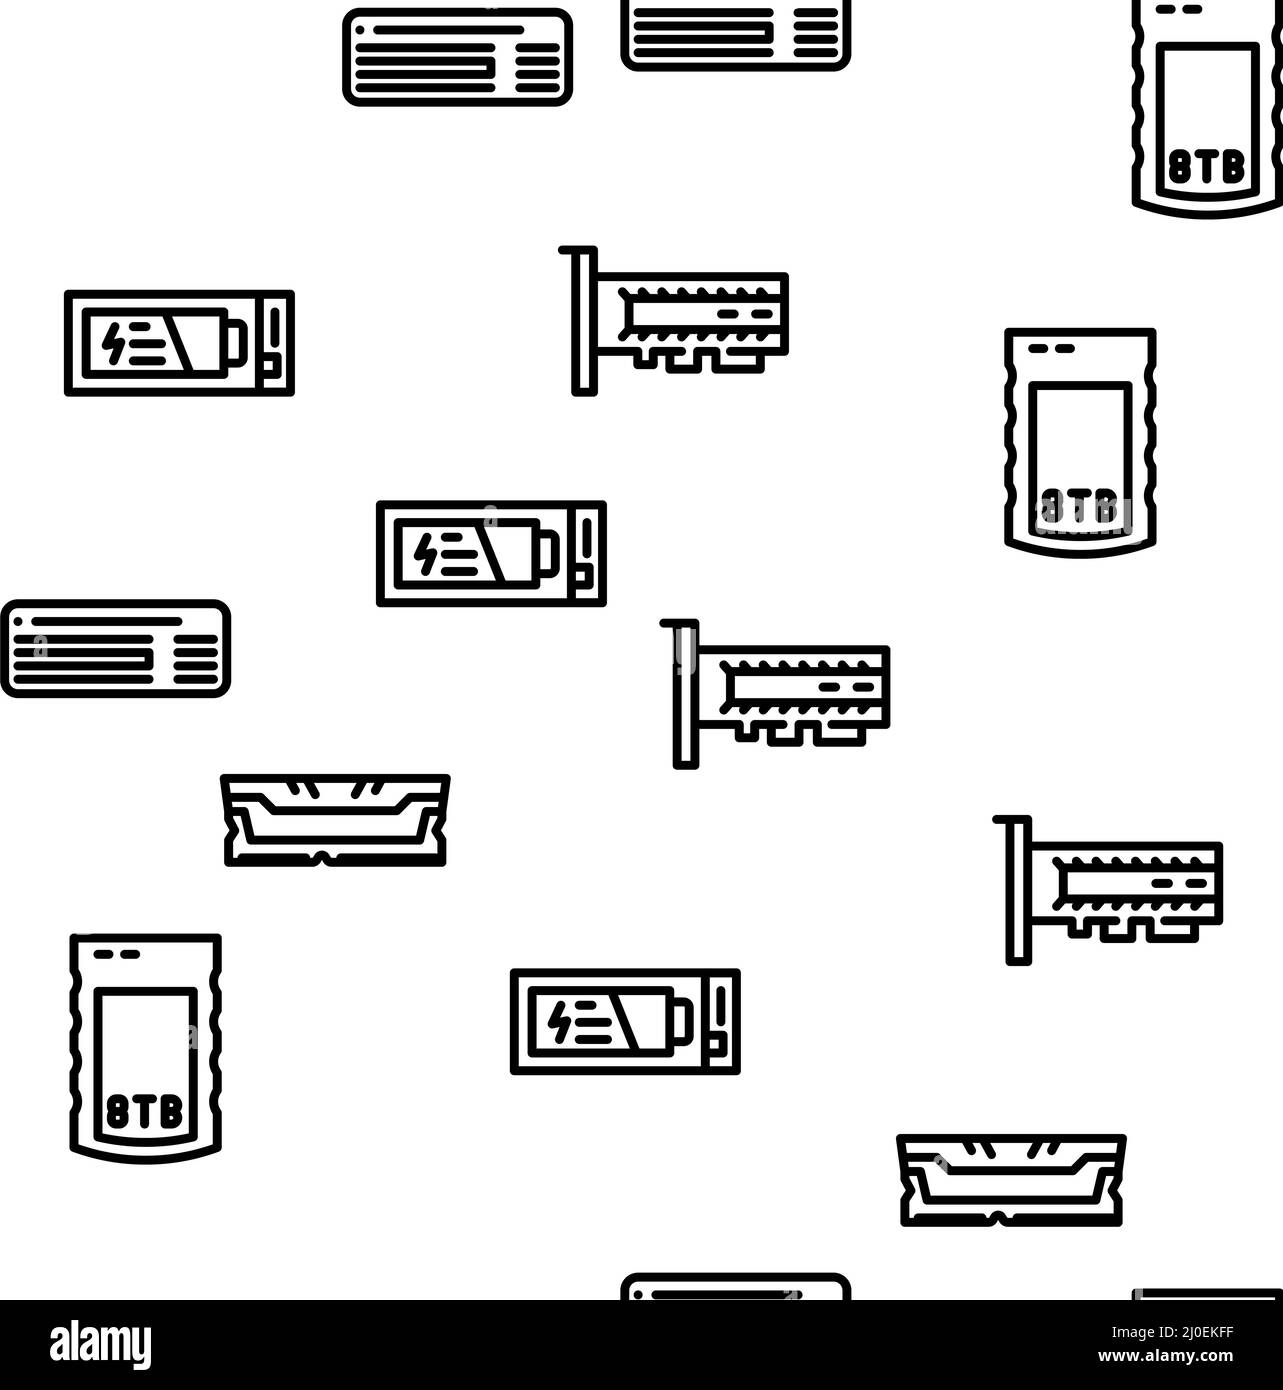 Computer Accessories And Parts Vector Seamless Pattern Stock Vector